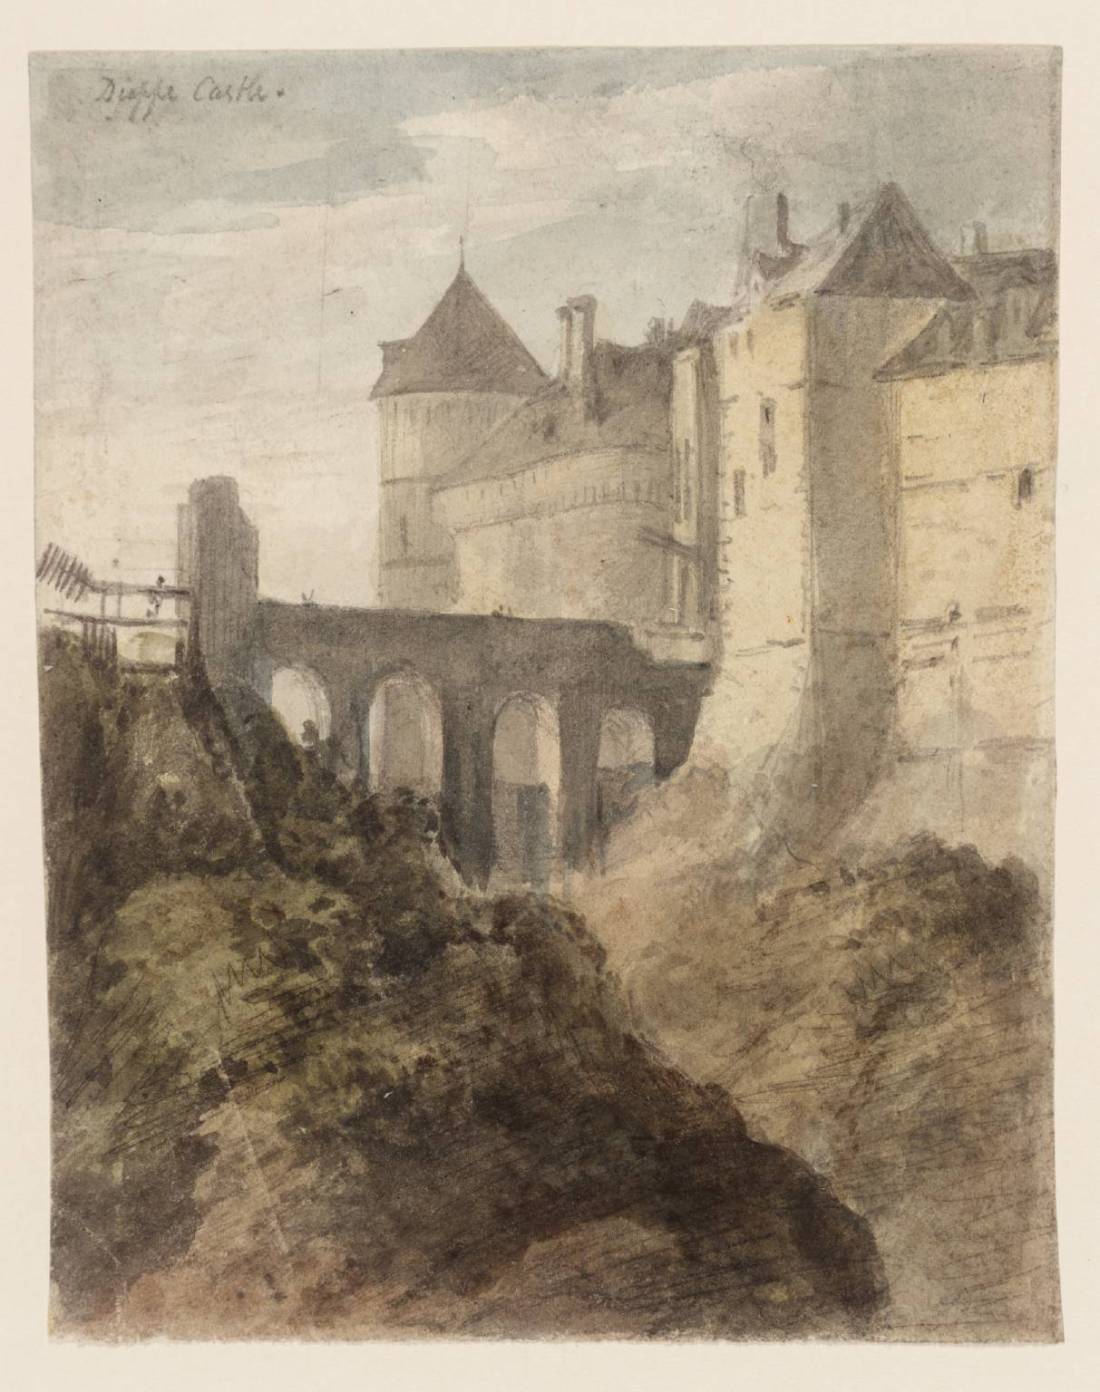 John Charles Denham Dieppe Castle, after Cotman (date unknown) Graphite, watercolour and ink on paper, 142 x 111 mm London, Tate, T10449, Purchased as part of the Oppé Collection with assistance from the National Lottery through the Heritage Lottery Fund 1996 Image, courtesy of Tate Britain. To see this image in Tae’s own online catalogue, click on the following link, and then press your browser’s ‘back’ button to return to this page: http://www.tate.org.uk/art/artworks/denham-dieppe-castle-after-cotman-t10449 exhibited 1796-1858 Purchased as part of the Oppé Collection with assistance from the National Lottery through the Heritage Lottery Fund 1996 http://www.tate.org.uk/art/work/T10449 